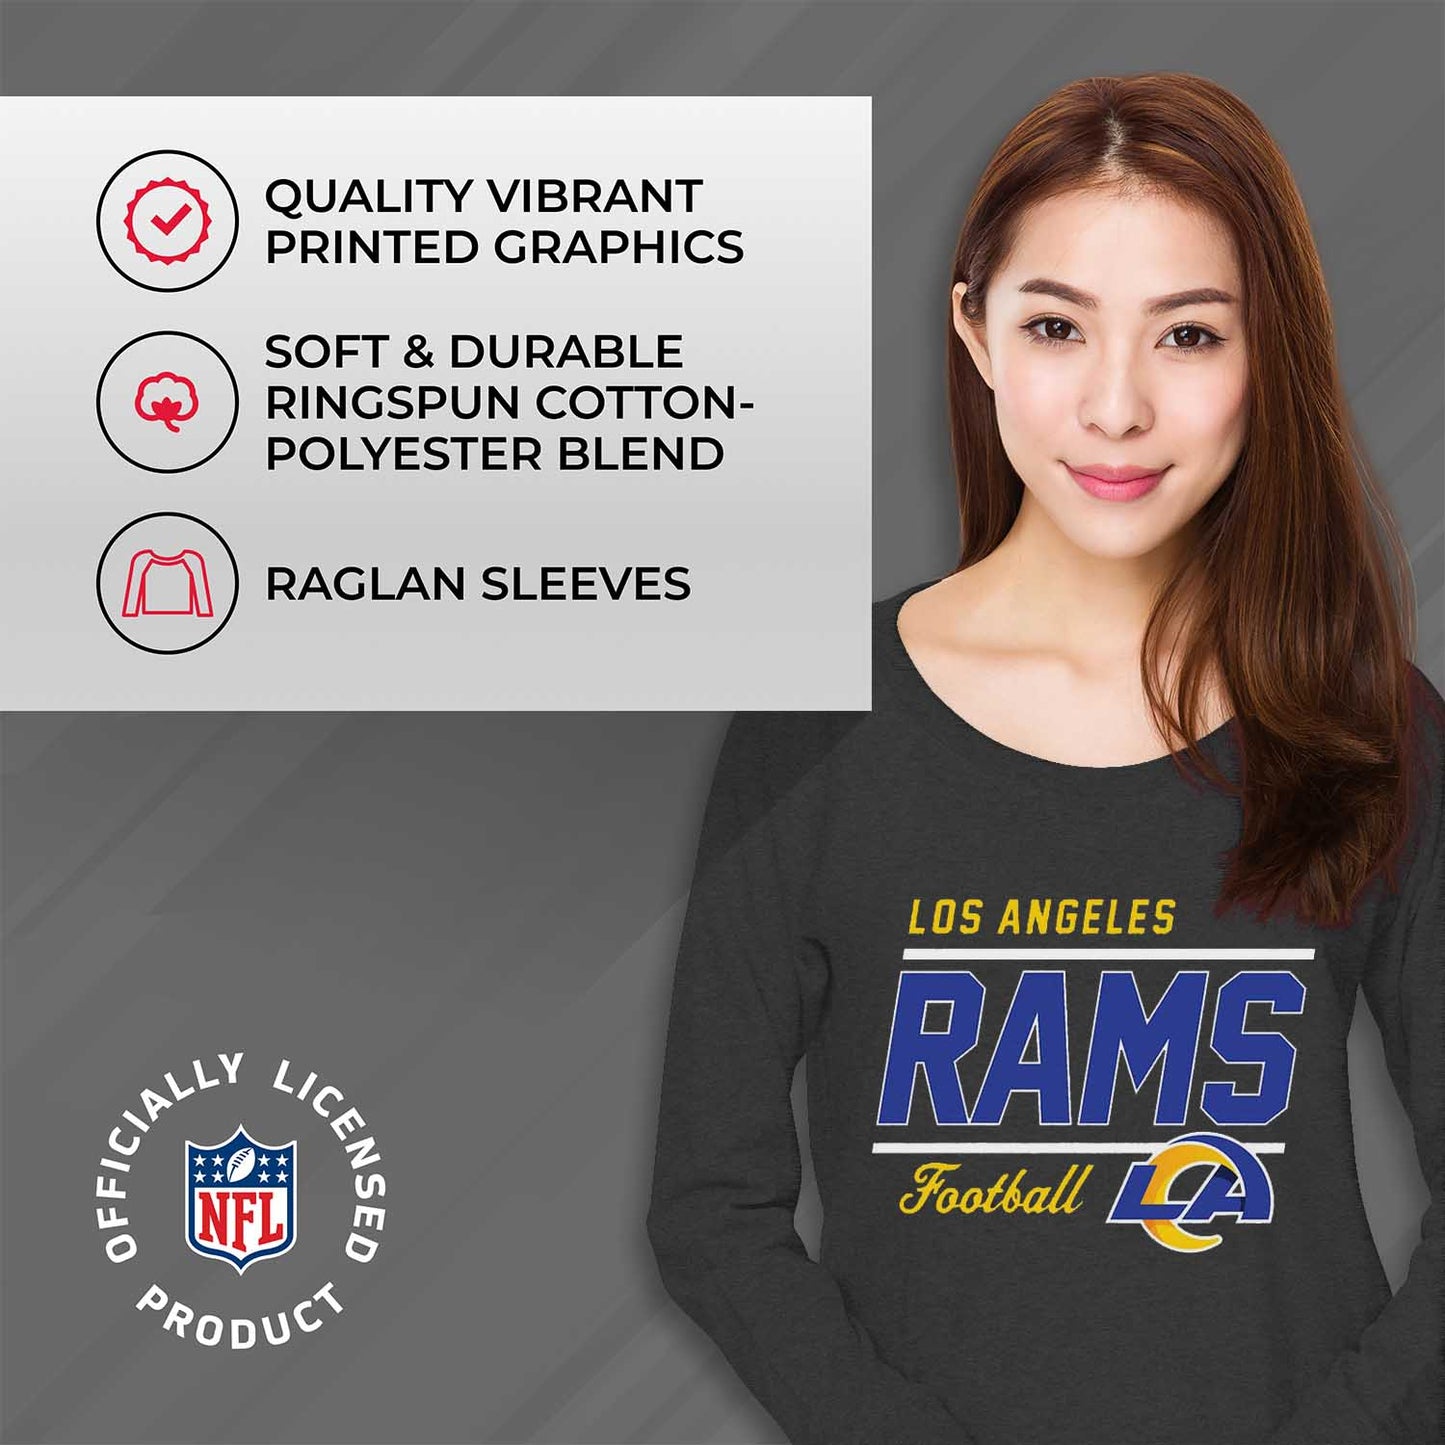 Los Angeles Rams NFL Womens Crew Neck Light Weight - Charcoal